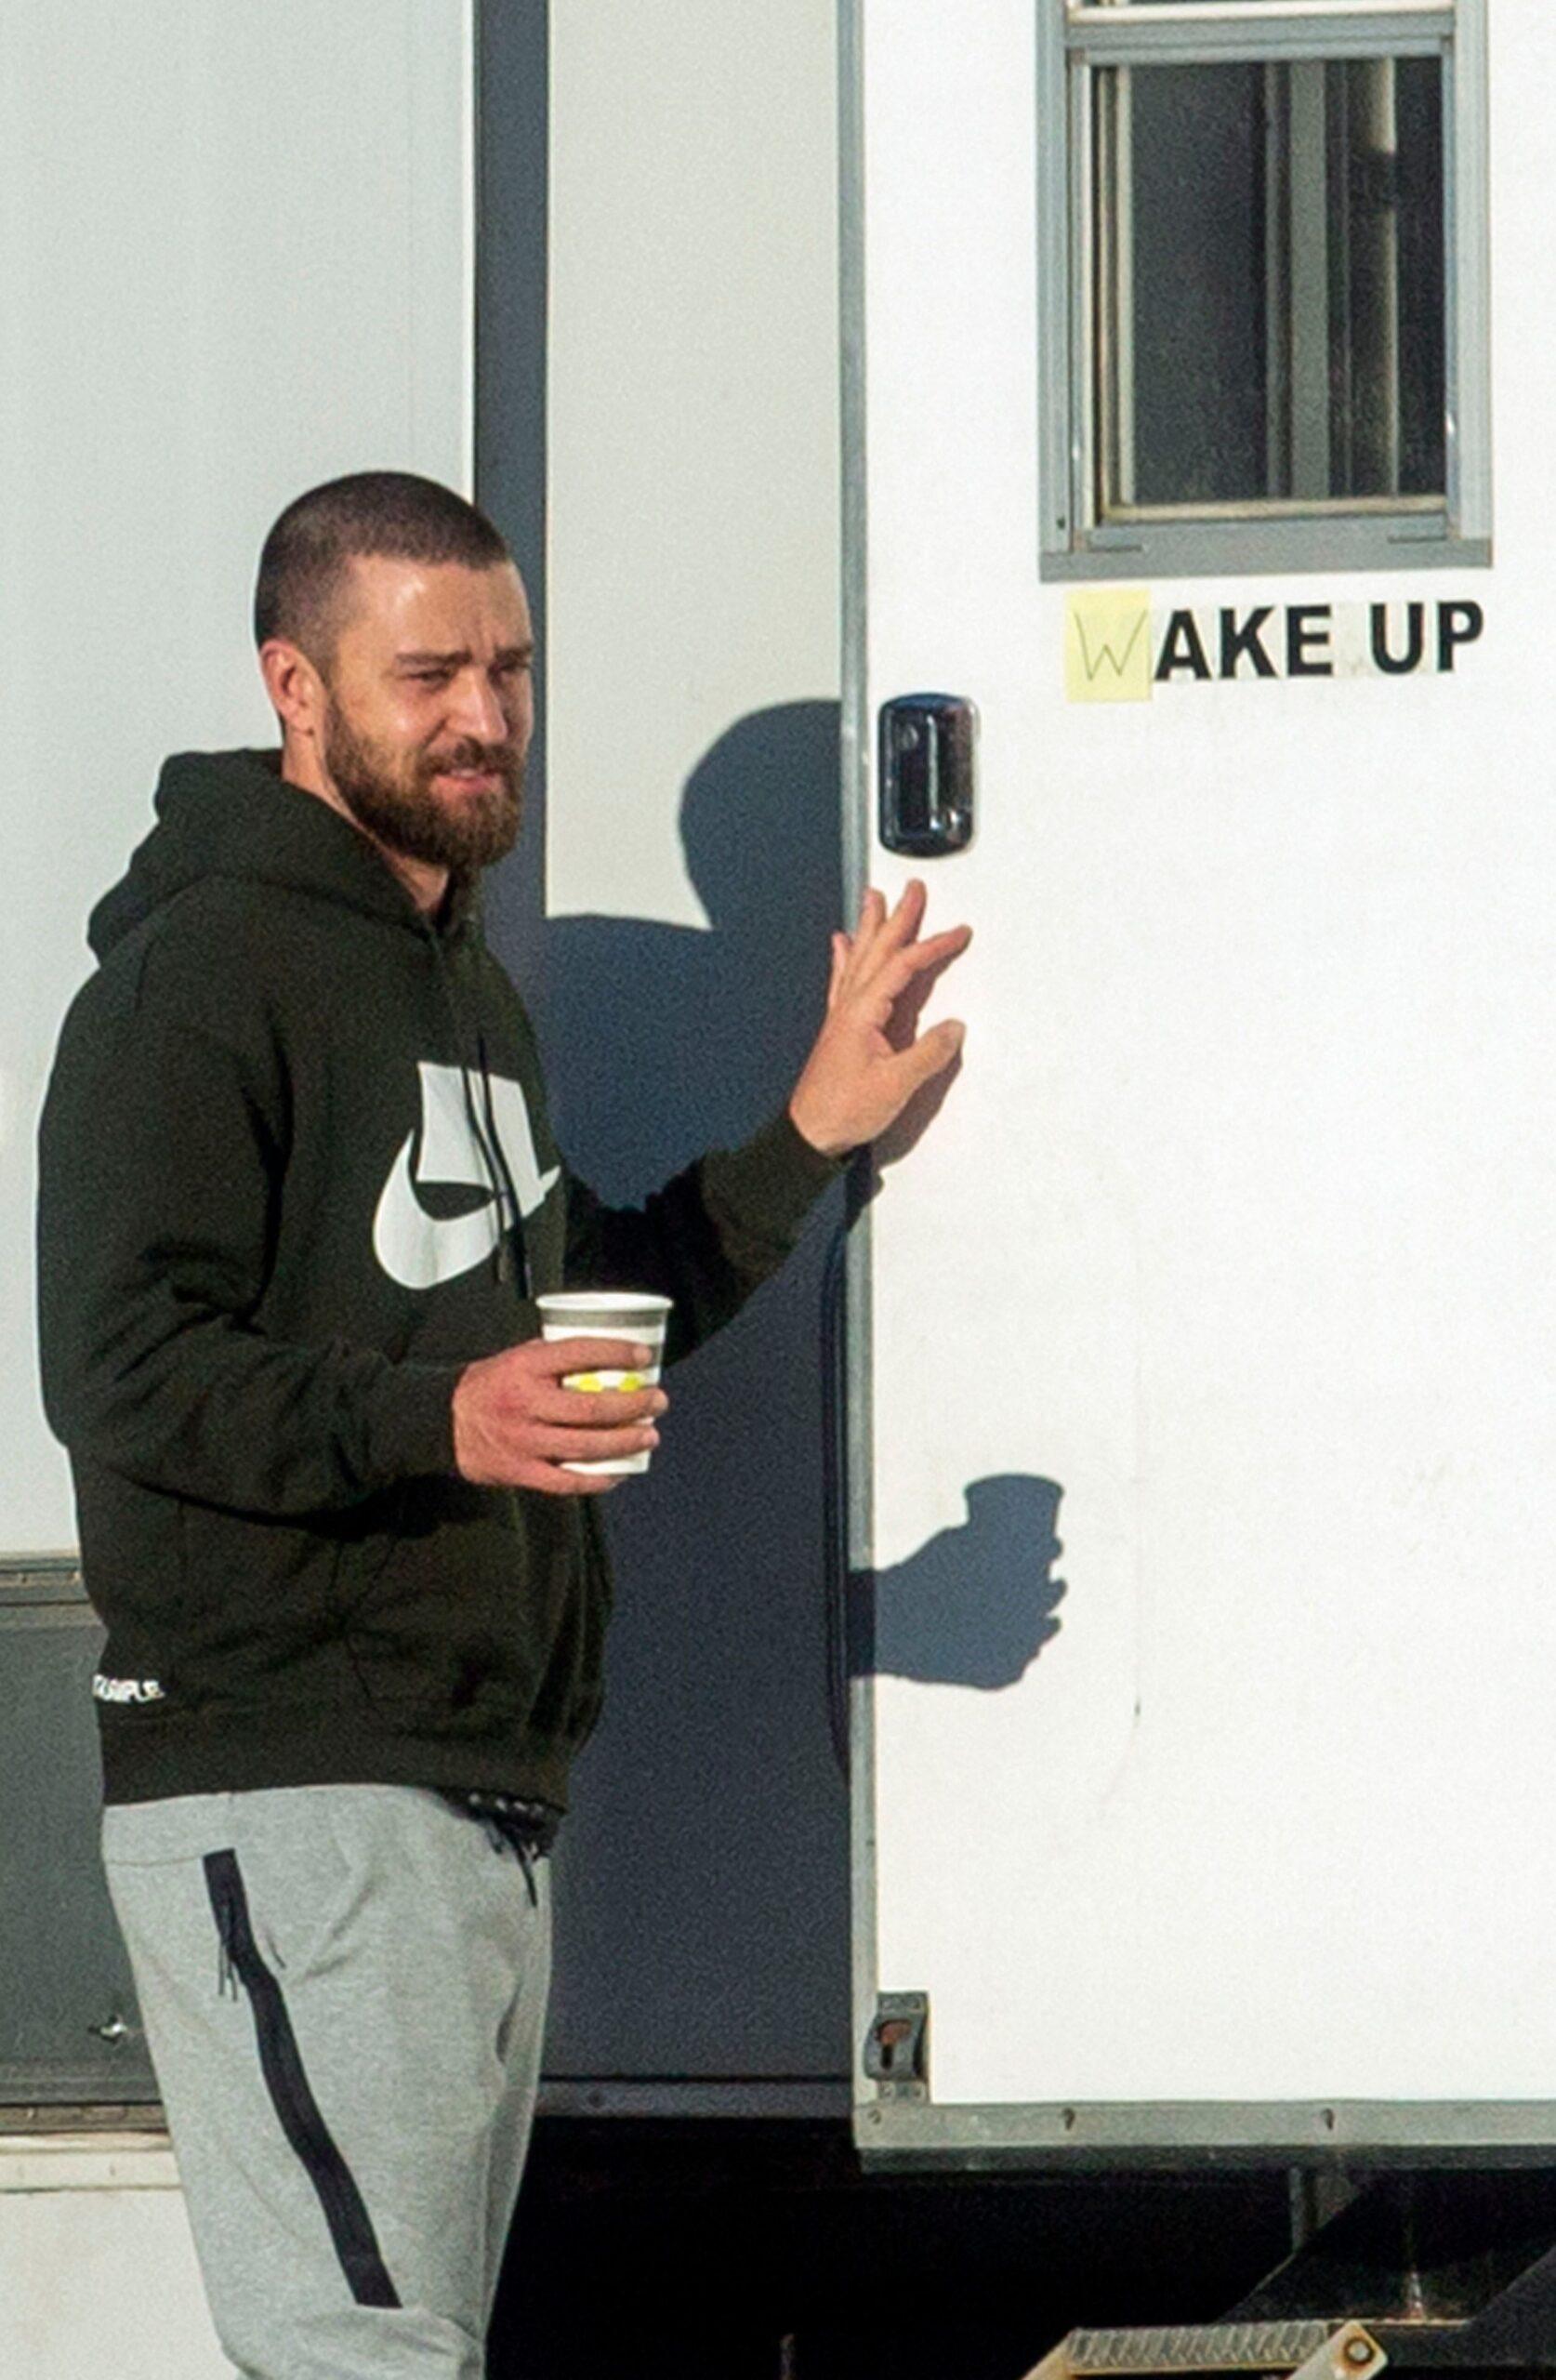 Justin Timberlake gets back to work after the controversy of being photographed holding hands with his latest co-star.